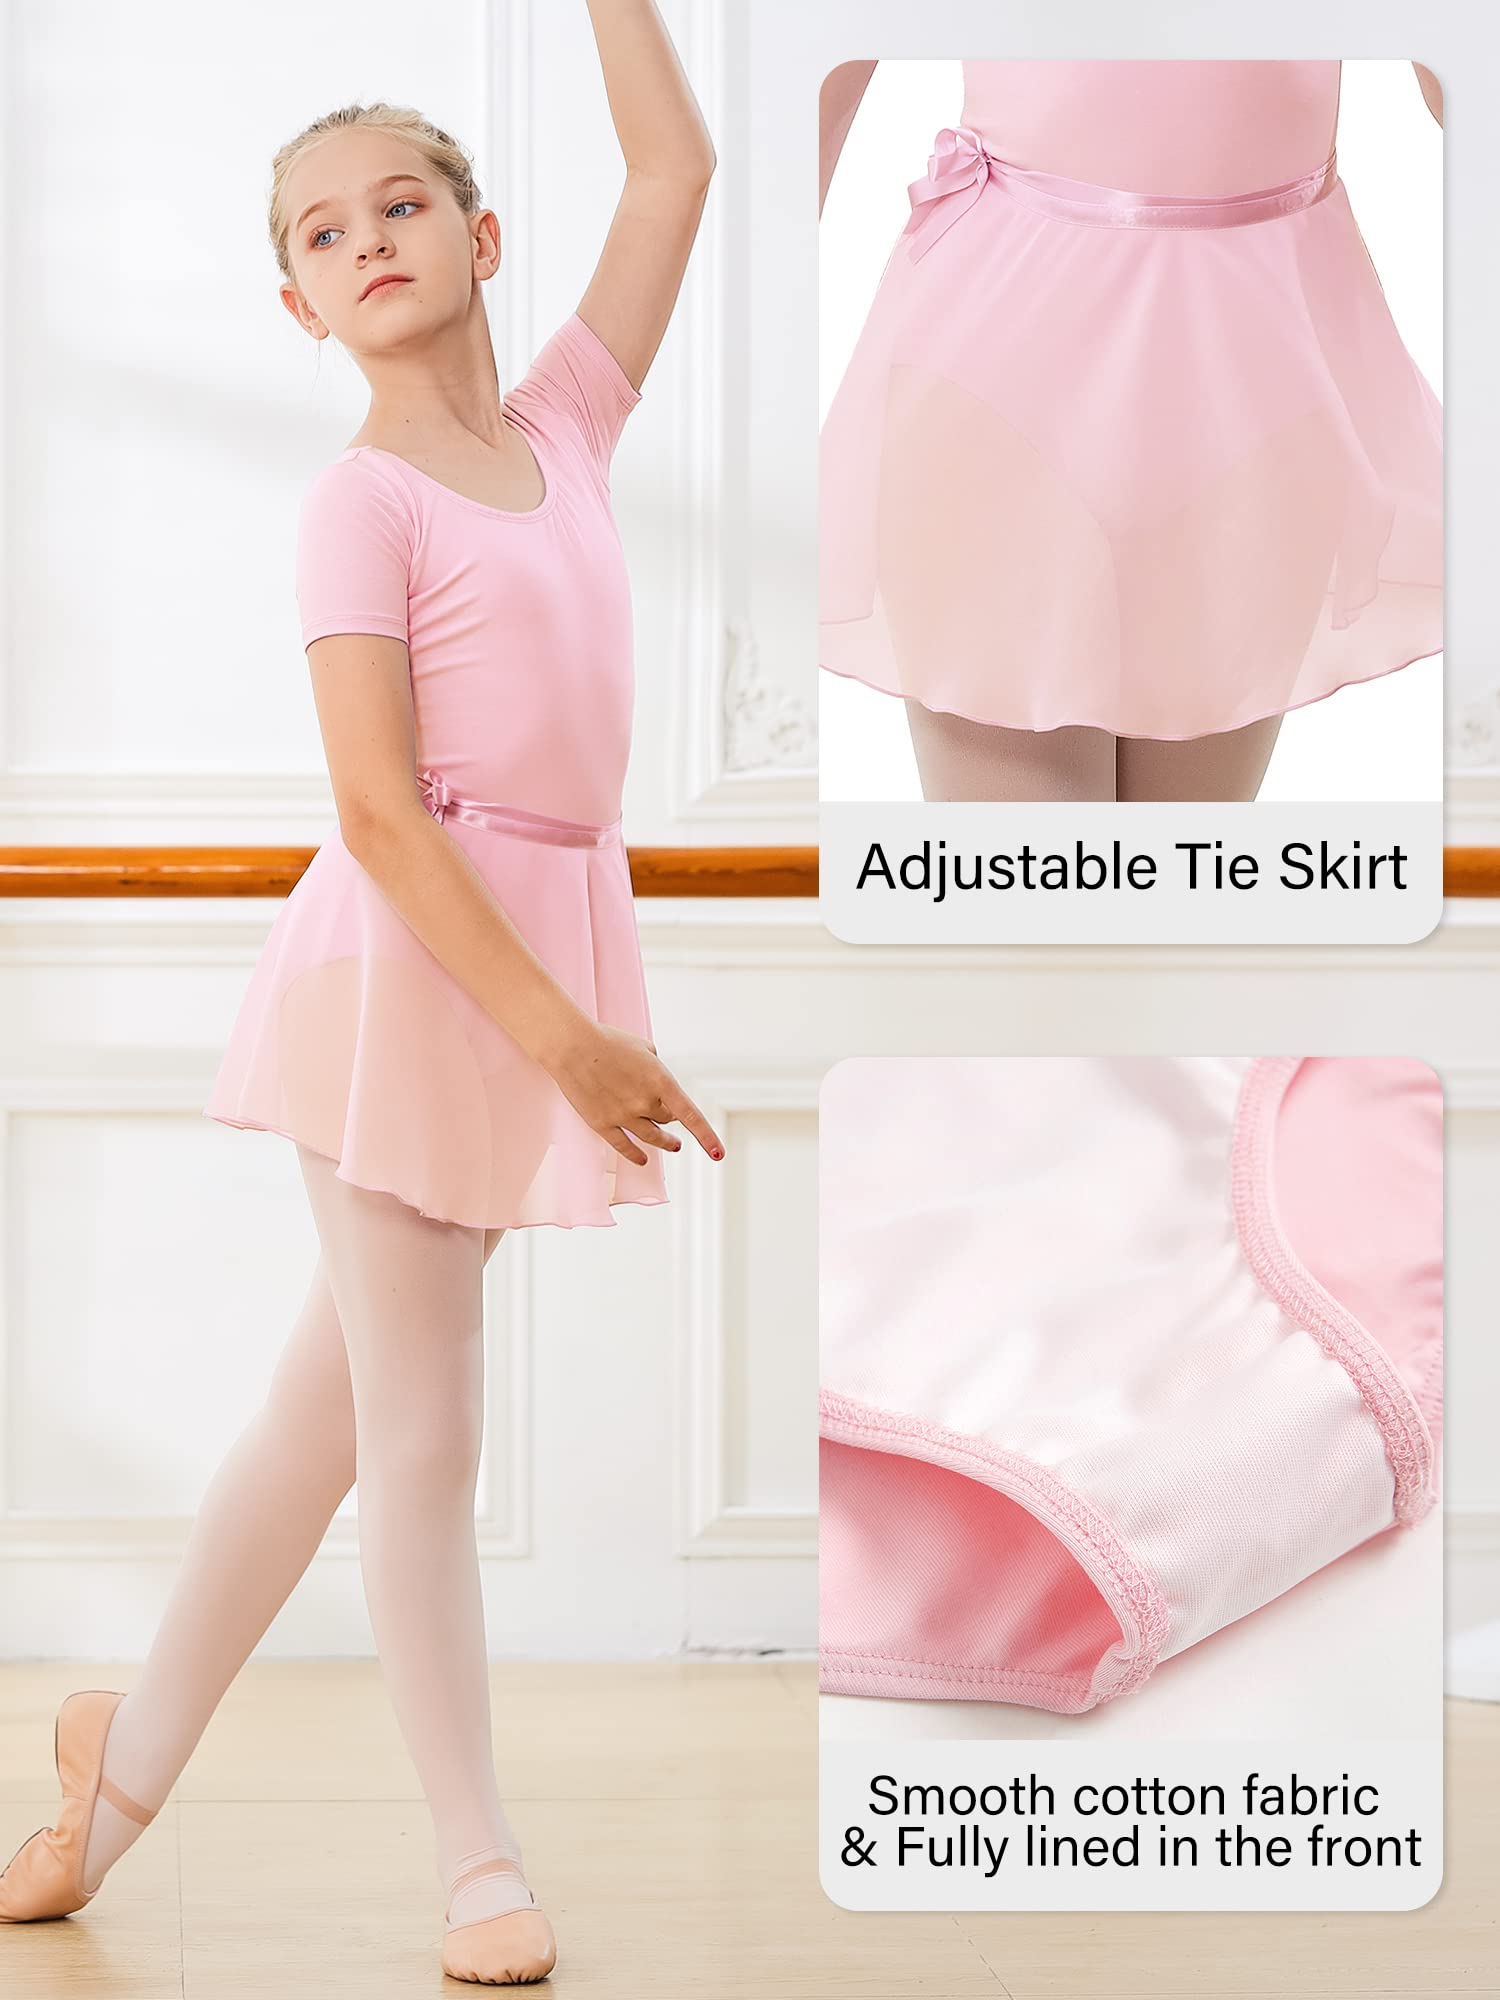 Stelle Ballet Leotards for Girls Toddler Dance Dress Outfit Combo with Dance Skirt and Tights (Toddler/Little Kid/Big Kid)